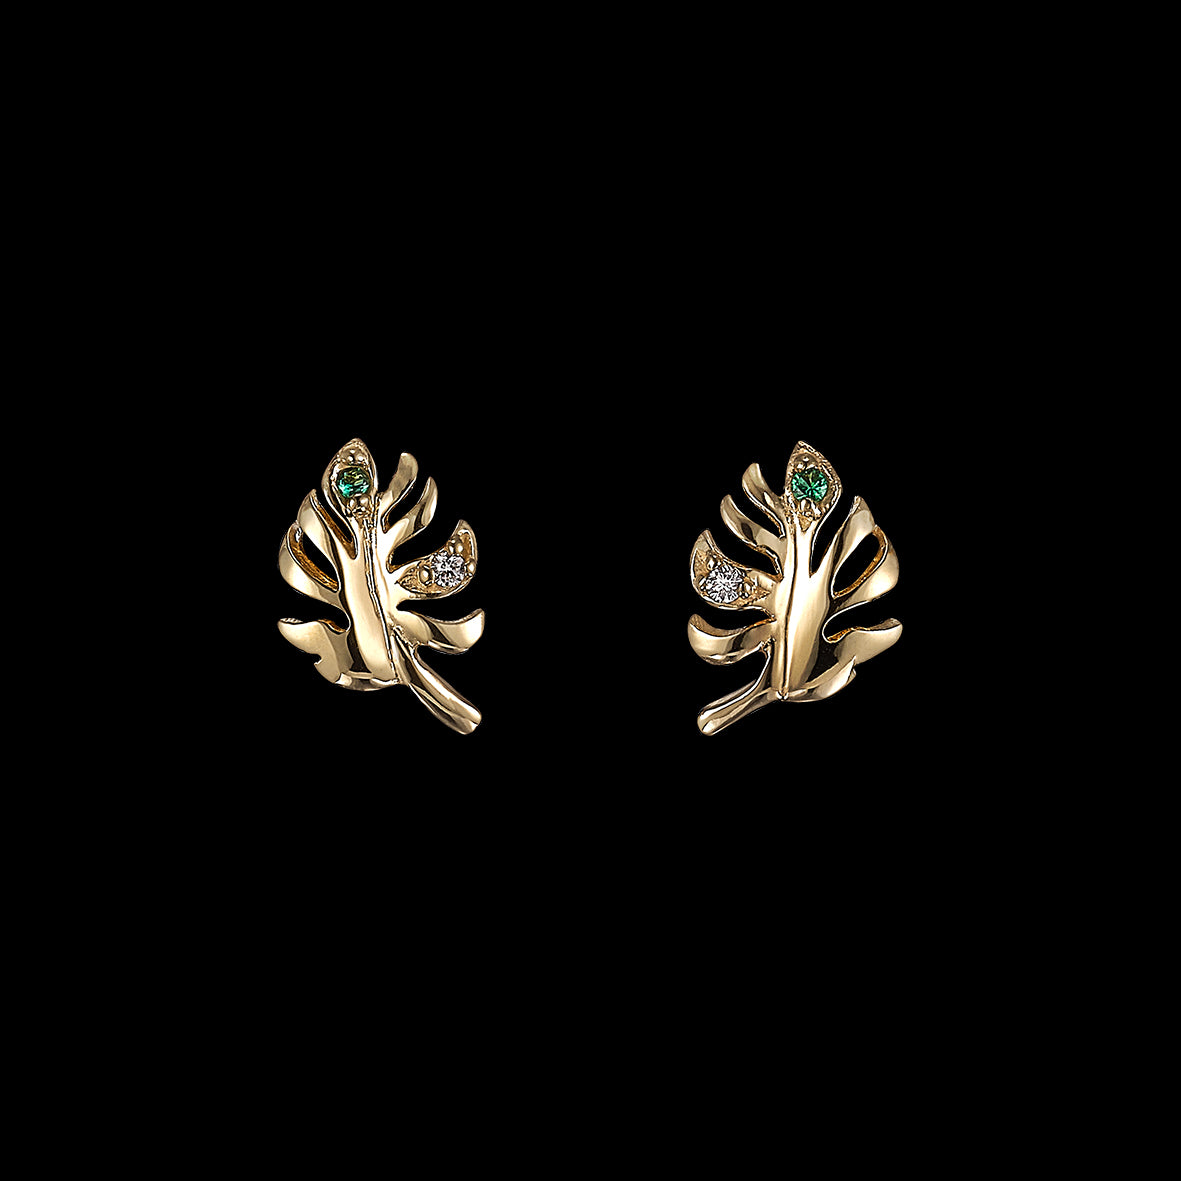 Gold Palm Studs, Earring, Anabela Chan Joaillerie - Fine jewelry with laboratory grown and created gemstones hand-crafted in the United Kingdom. Anabela Chan Joaillerie is the first fine jewellery brand in the world to champion laboratory-grown and created gemstones with high jewellery design, artisanal craftsmanship and a focus on ethical and sustainable innovations.